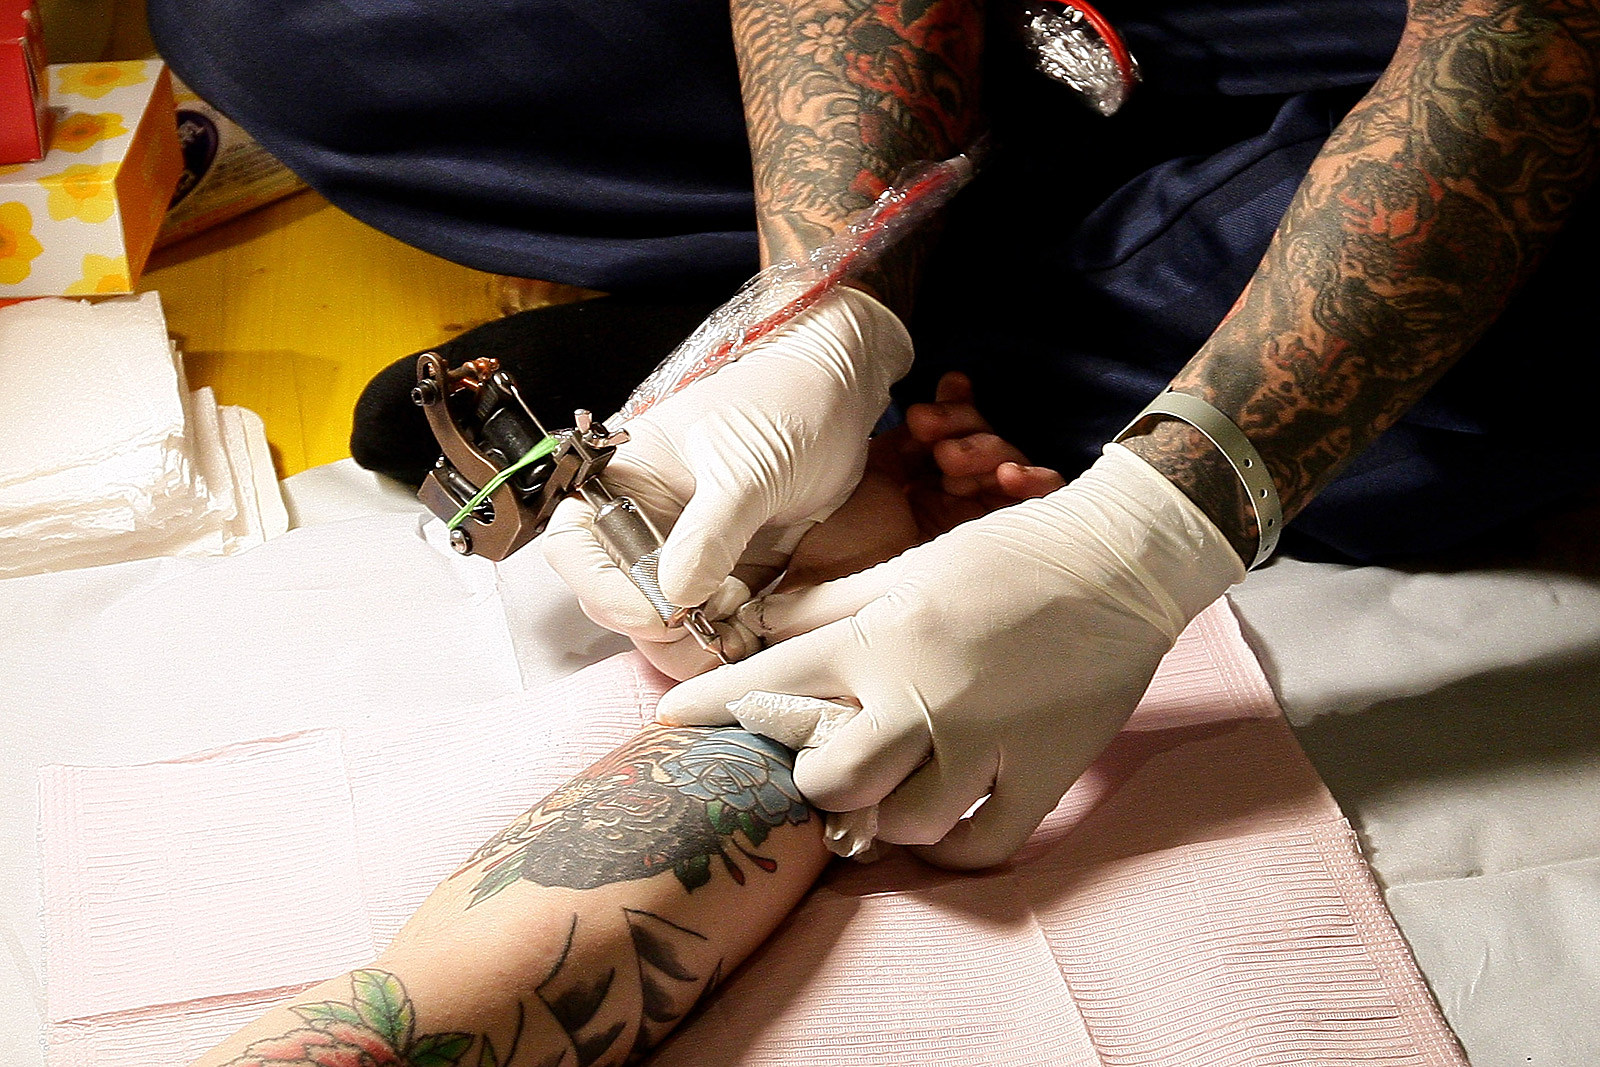 New mobile e-tattoo better monitors heart, can help prevent heart disease